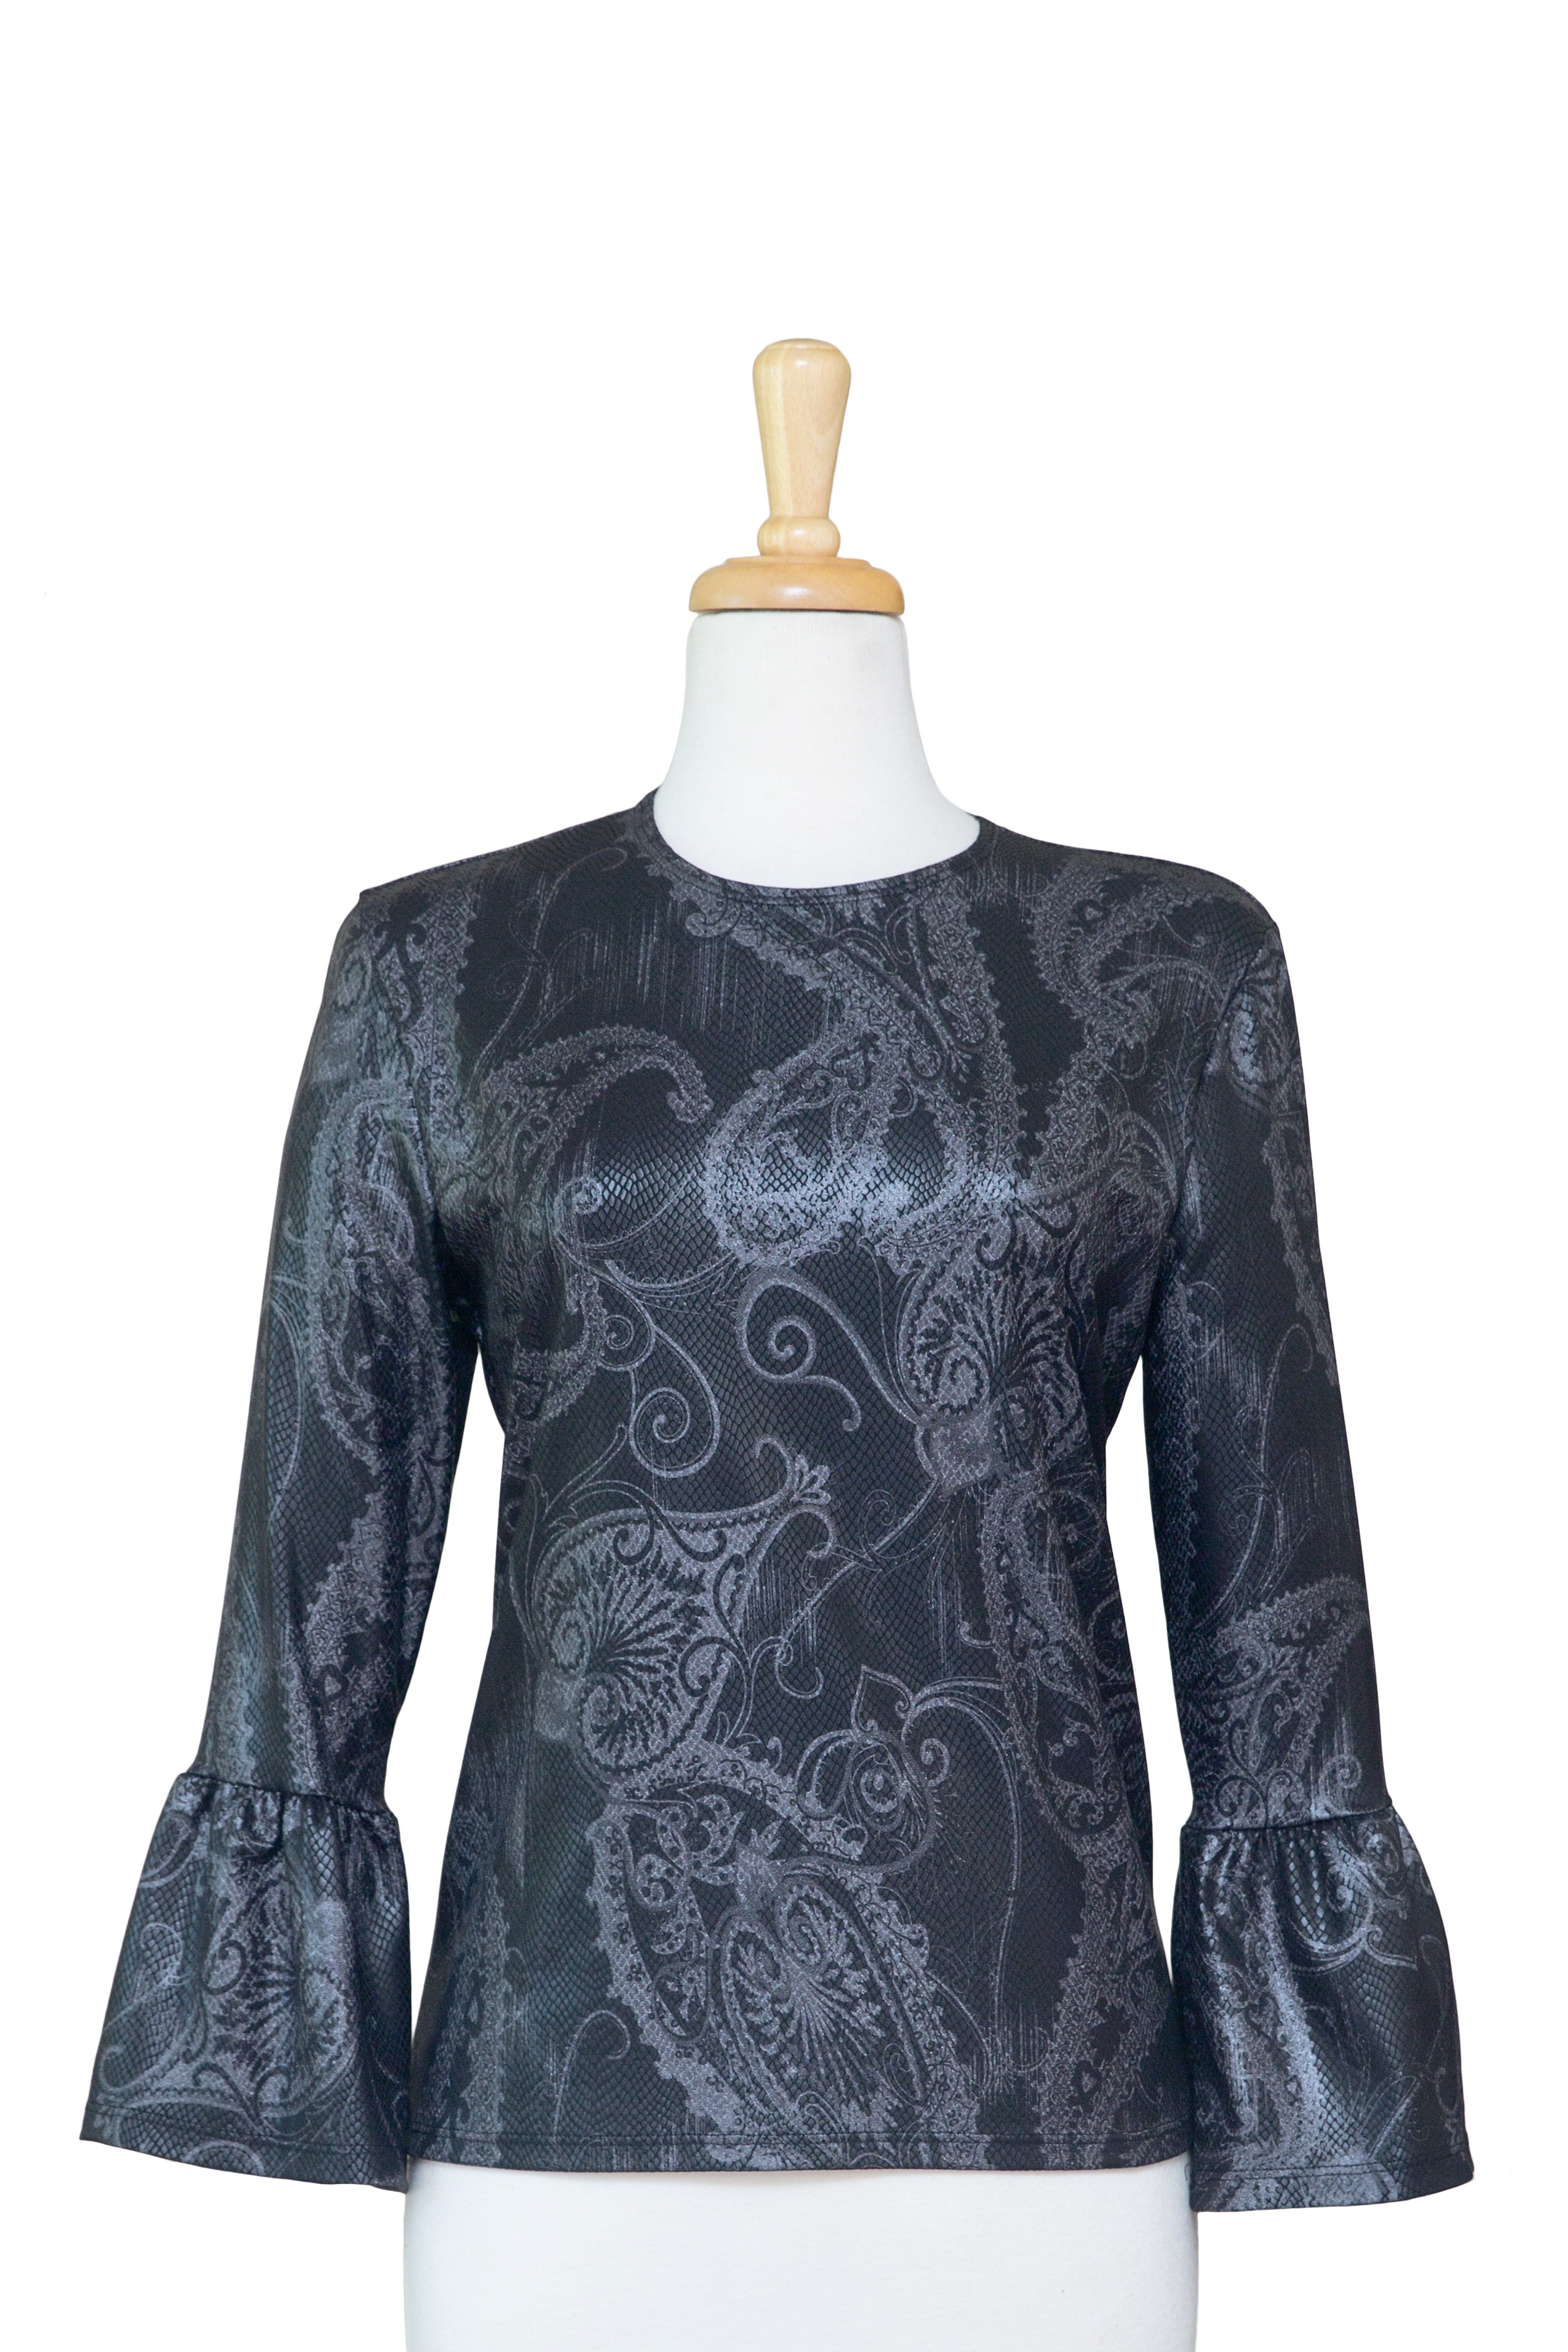 Black and Silver Paisley Bell  Sleeve Microfiber Top